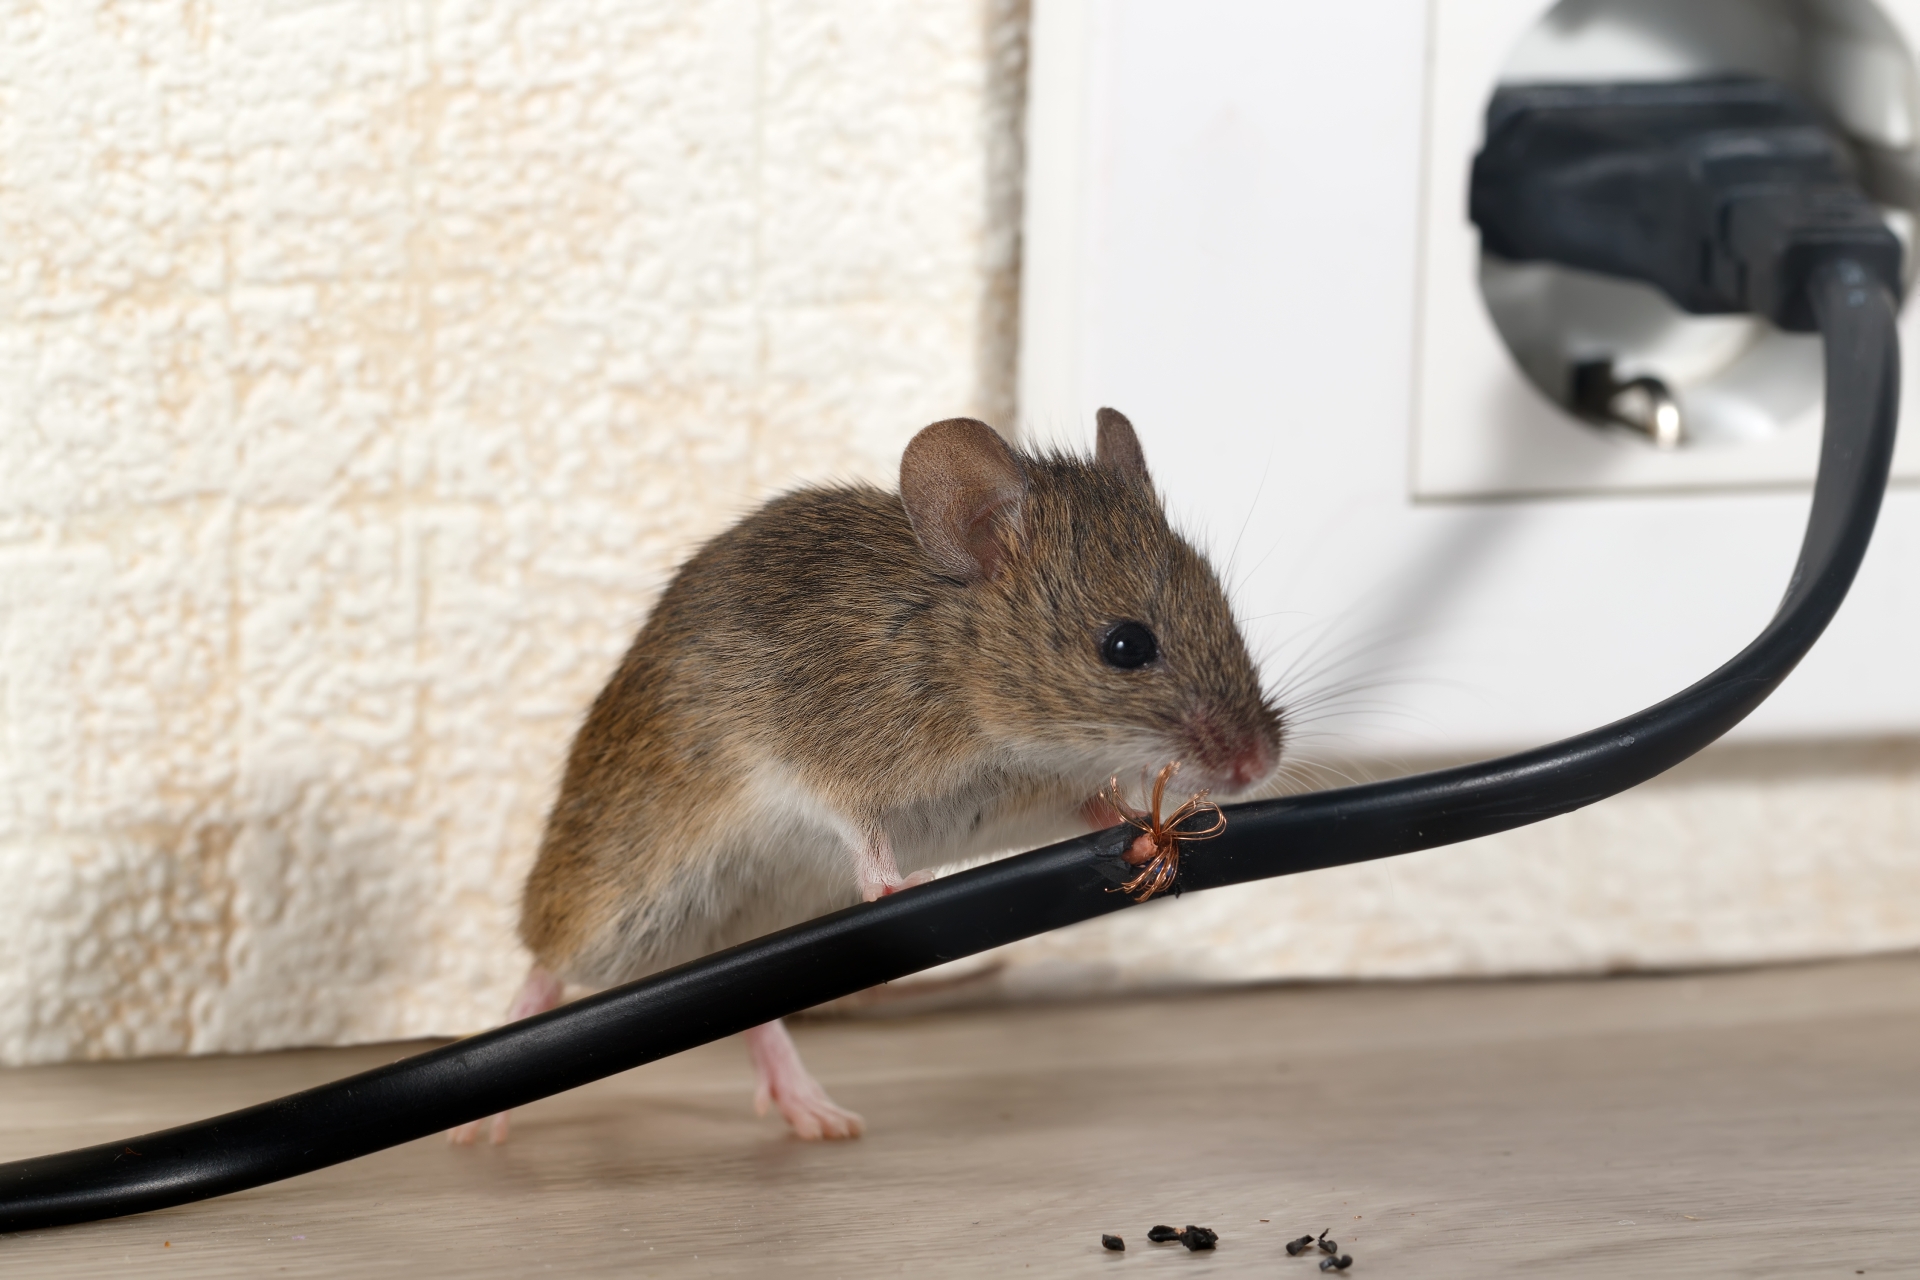 Mice Infestation, Pest Control in Canbury, Coombe, KT2. Call Now 020 8166 9746